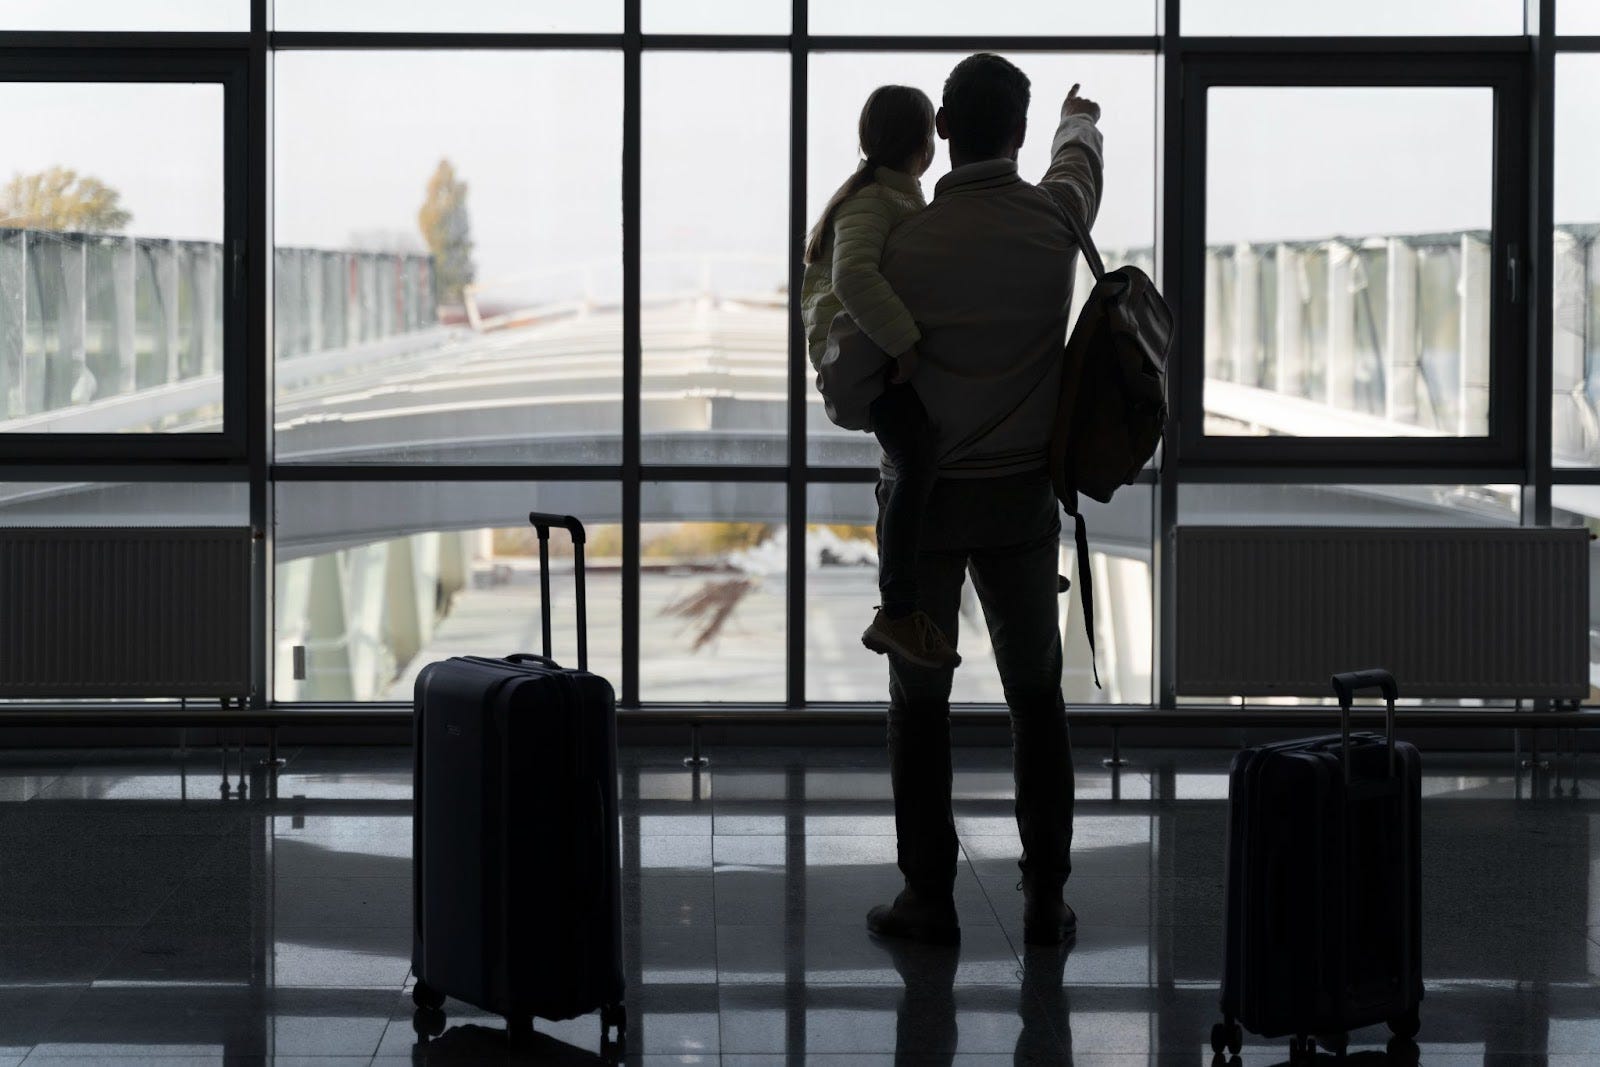 Packing Made Easy: How to Prepare for Airline Travel Without Stress